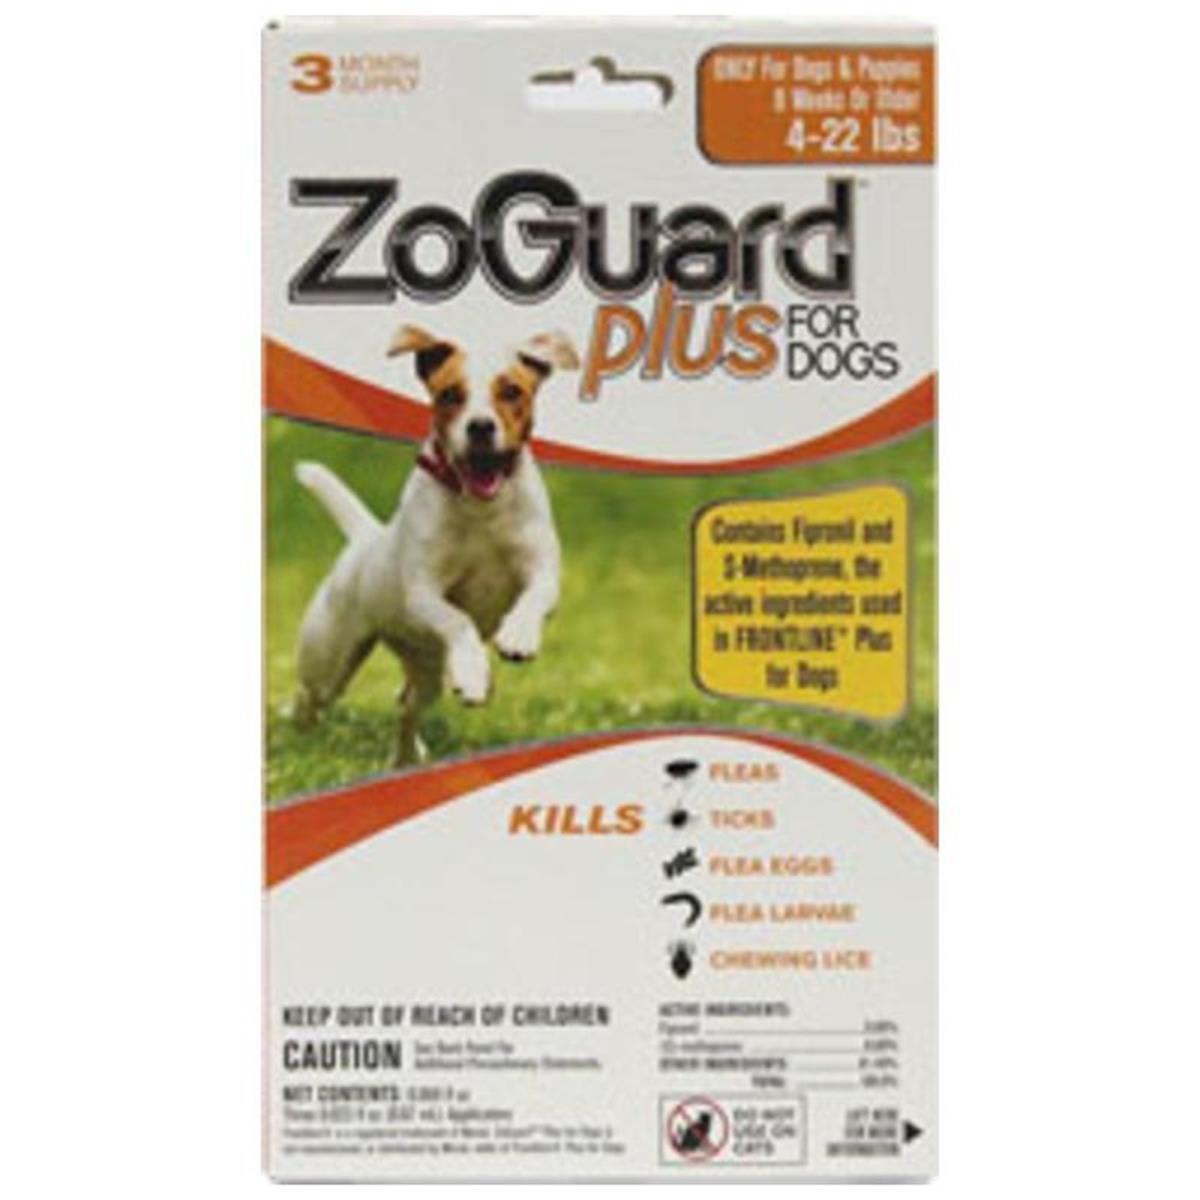 Picture of Durvet 011-511102 4-22 lbs Zoguard Plus for Dogs, Pack of 24